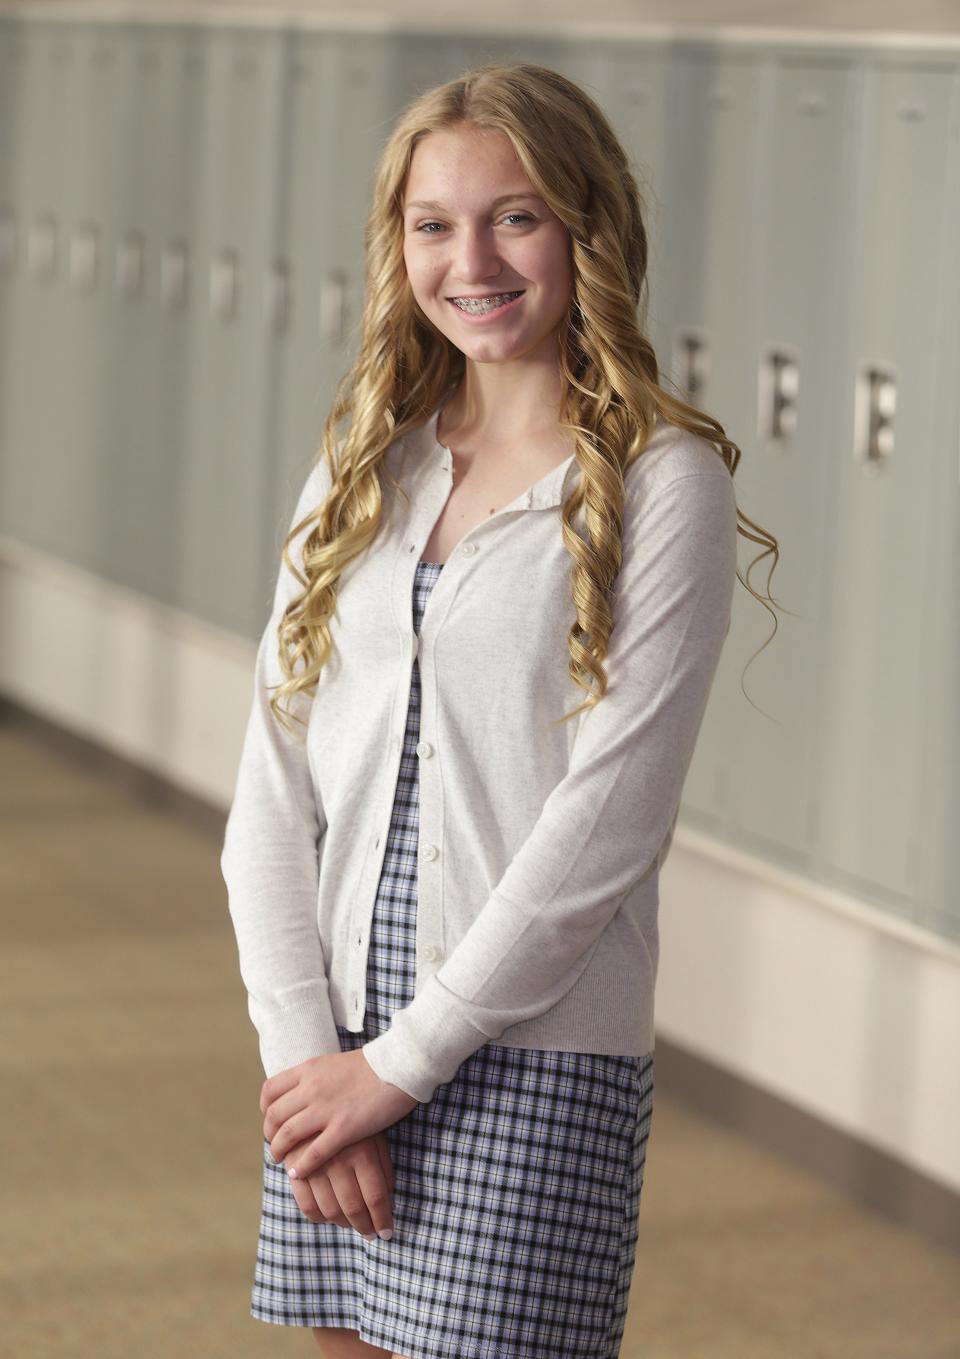 Callie Yeagley of Minerva Middle School is a Canton Repository Kid of Character for May.